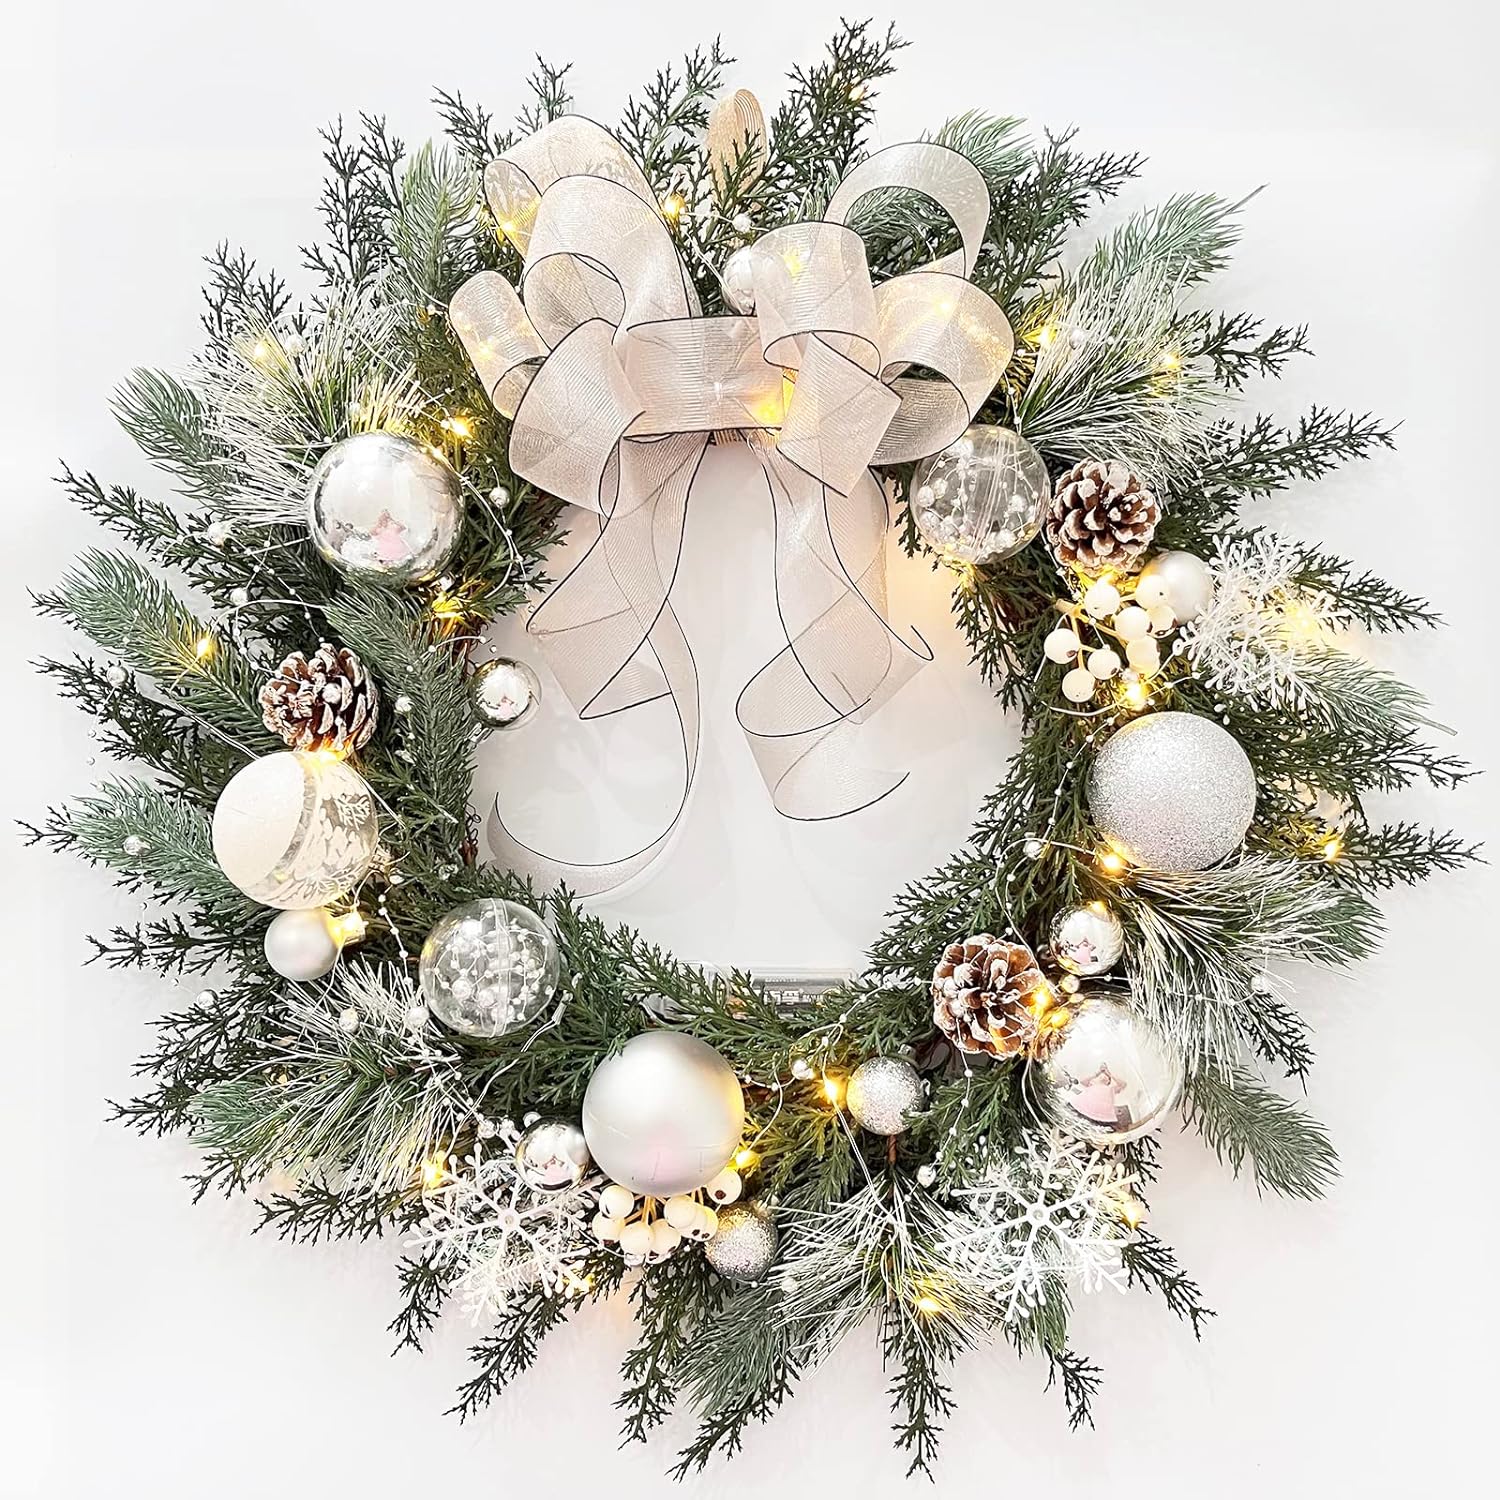 Christmas Wreath: The Perfect Way to Brighten Up Your Holiday Season